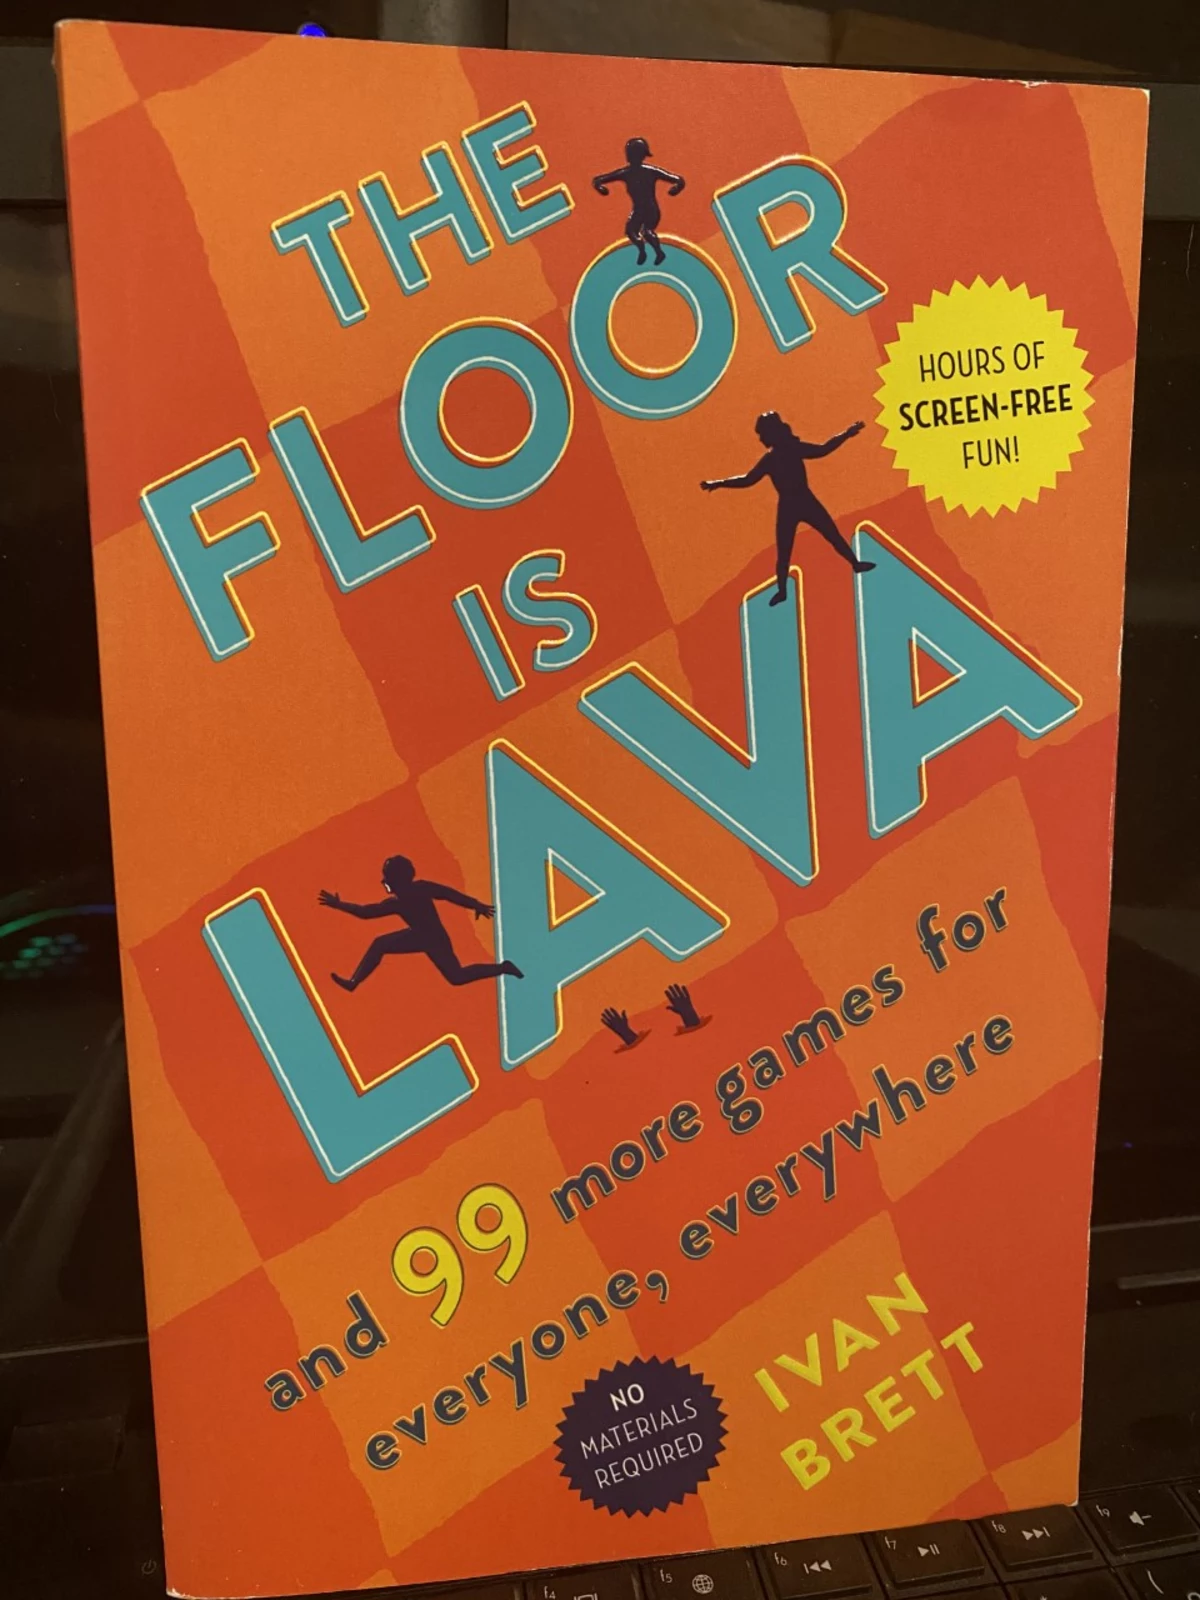 THE FLOOR IS LAVA - AND 99 MORE GAMES FOR EVERYONE, EVERYWHERE